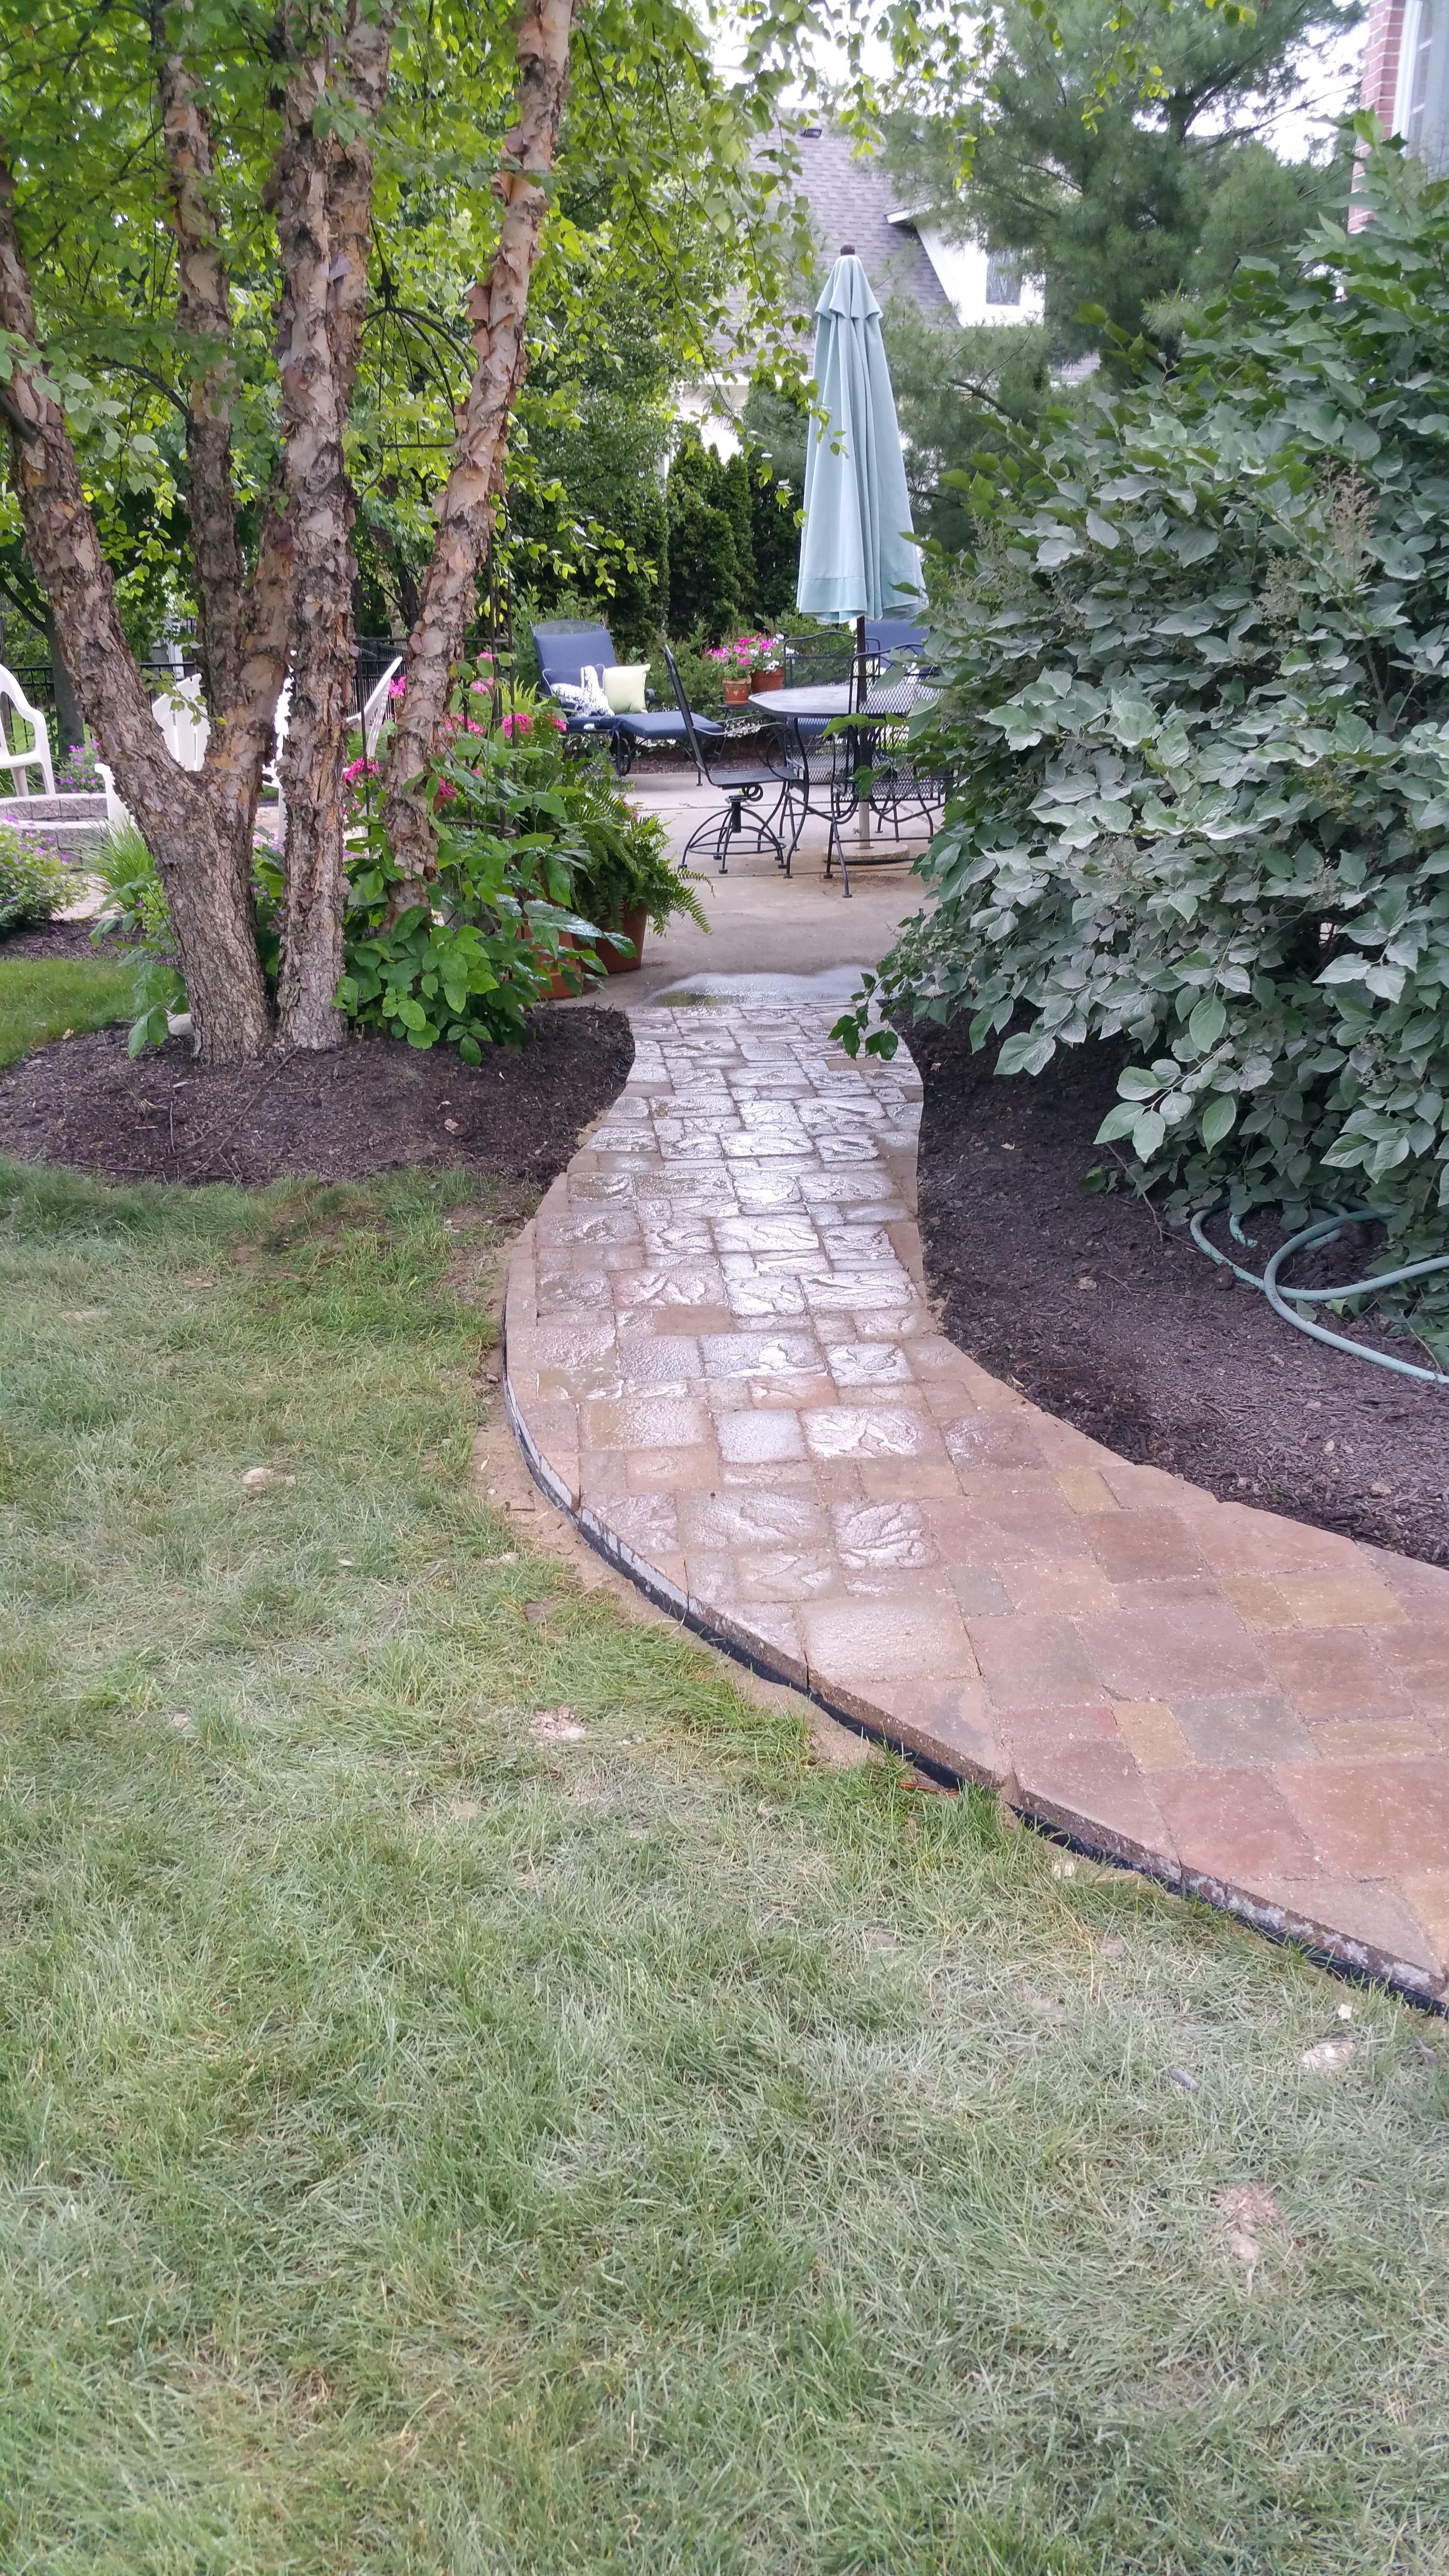 There was no sidewalk here when we got on the job. We cut out the sod and put in this beautiful sidewalk from the drive winding around the flower beds and to the patio in the back yard.